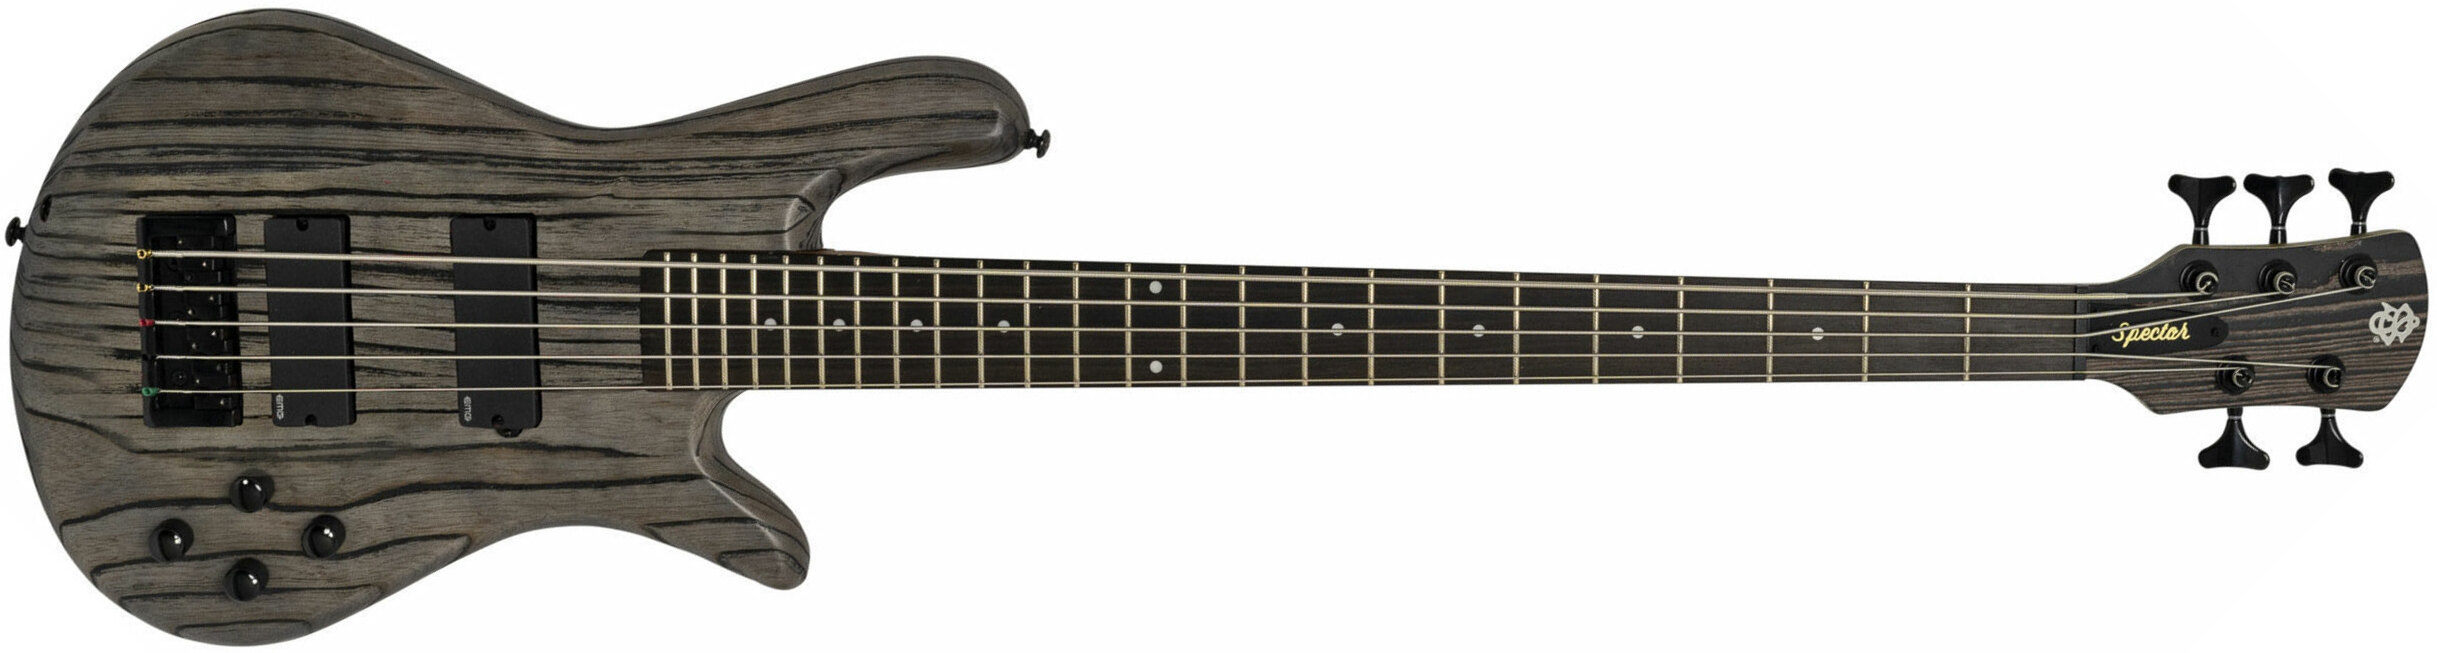 Spector Ns Pulse I 5c Active Emg Eb - Charcoal Grey - Solidbody E-bass - Main picture